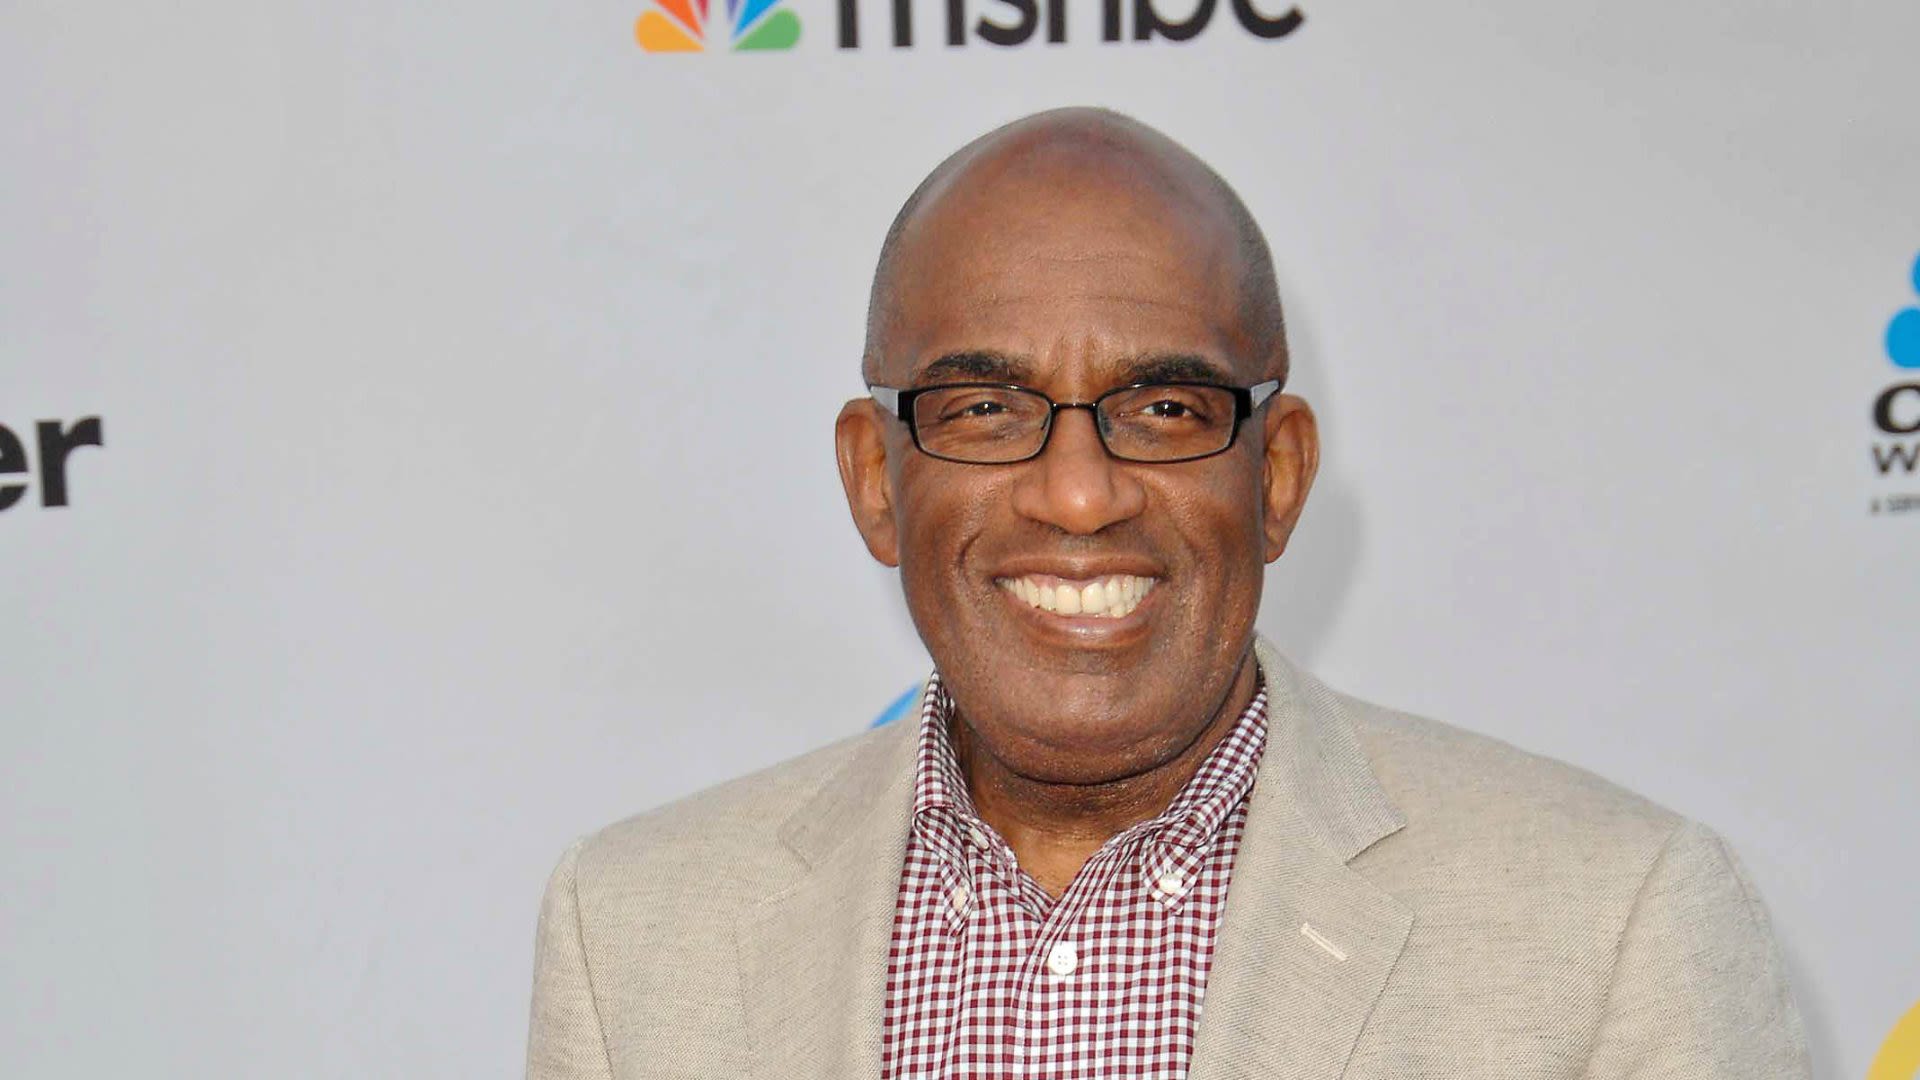 Al Roker believes this thing is the greatest social platform